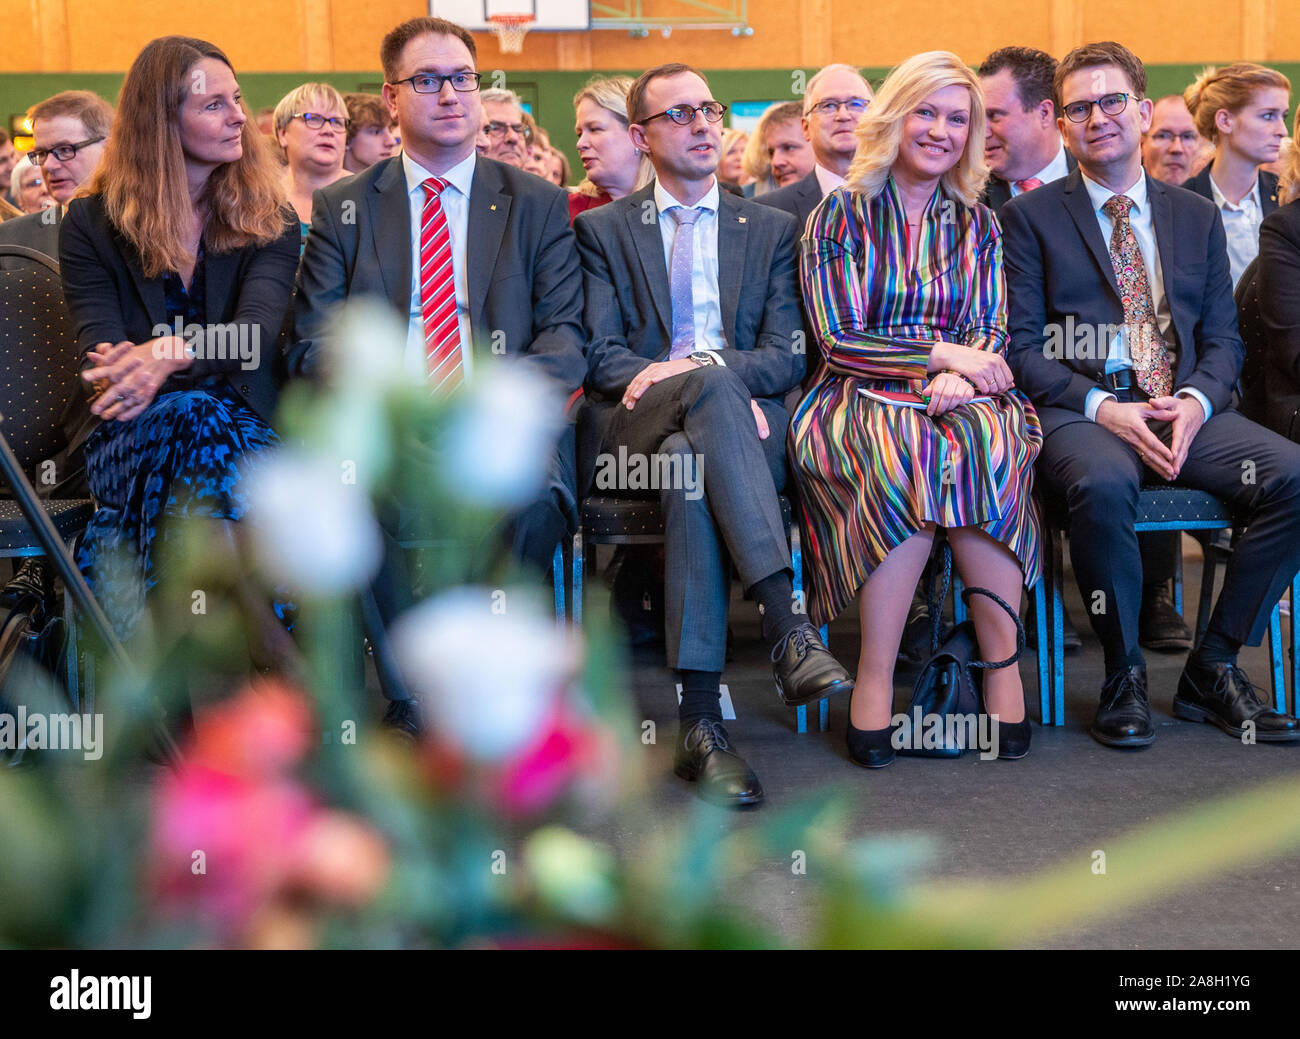 Dassow, Germany. 09th Nov, 2019. Manuela Schwesig (SPD), Prime Minister of Mecklenburg-Western Pomerania, and her husband Stefan Schwesig (r) are welcomed at the celebration of the anniversary of the fall of the Berlin Wall. The state government of Mecklenburg-Western Pomerania commemorates the historic event that marked the beginning of German reunification. In autumn 1989, long queues of cars drove from the small town of Dassow on the B 105 to Lübeck. Credit: Jens Büttner/dpa-Zentralbild/dpa/Alamy Live News Stock Photo